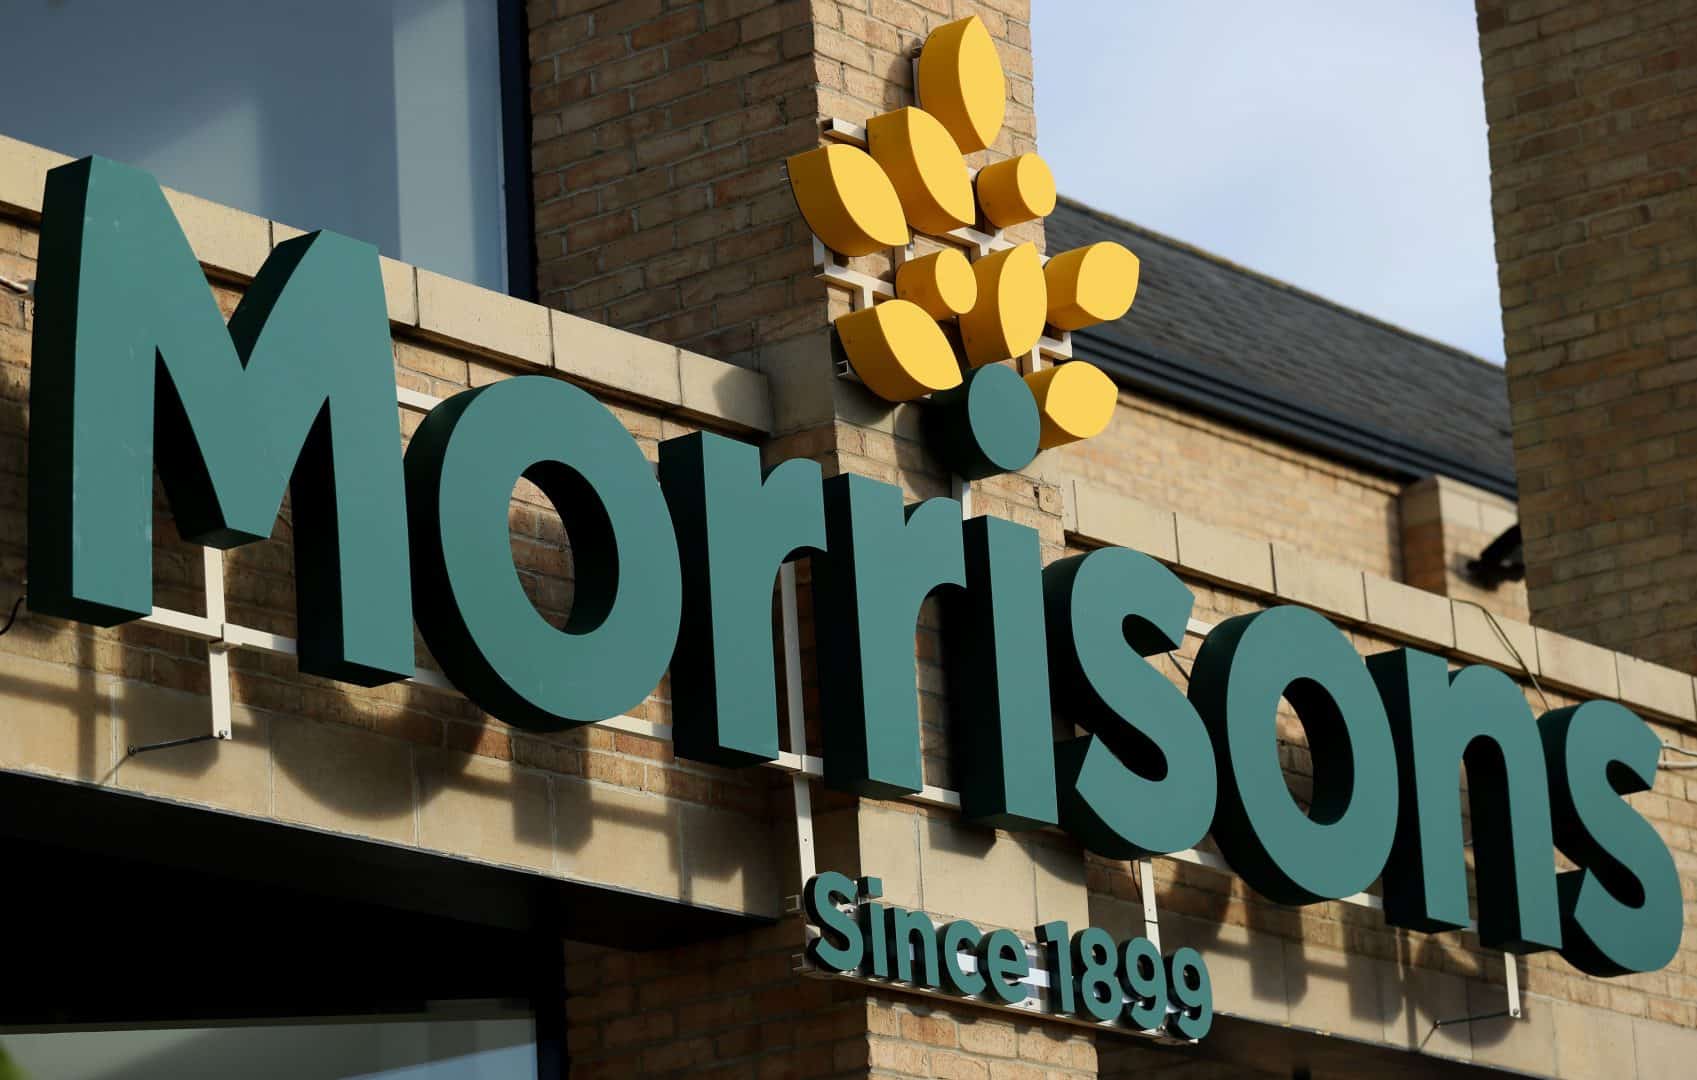 Morrisons to give food banks £10m during coronavirus outbreak